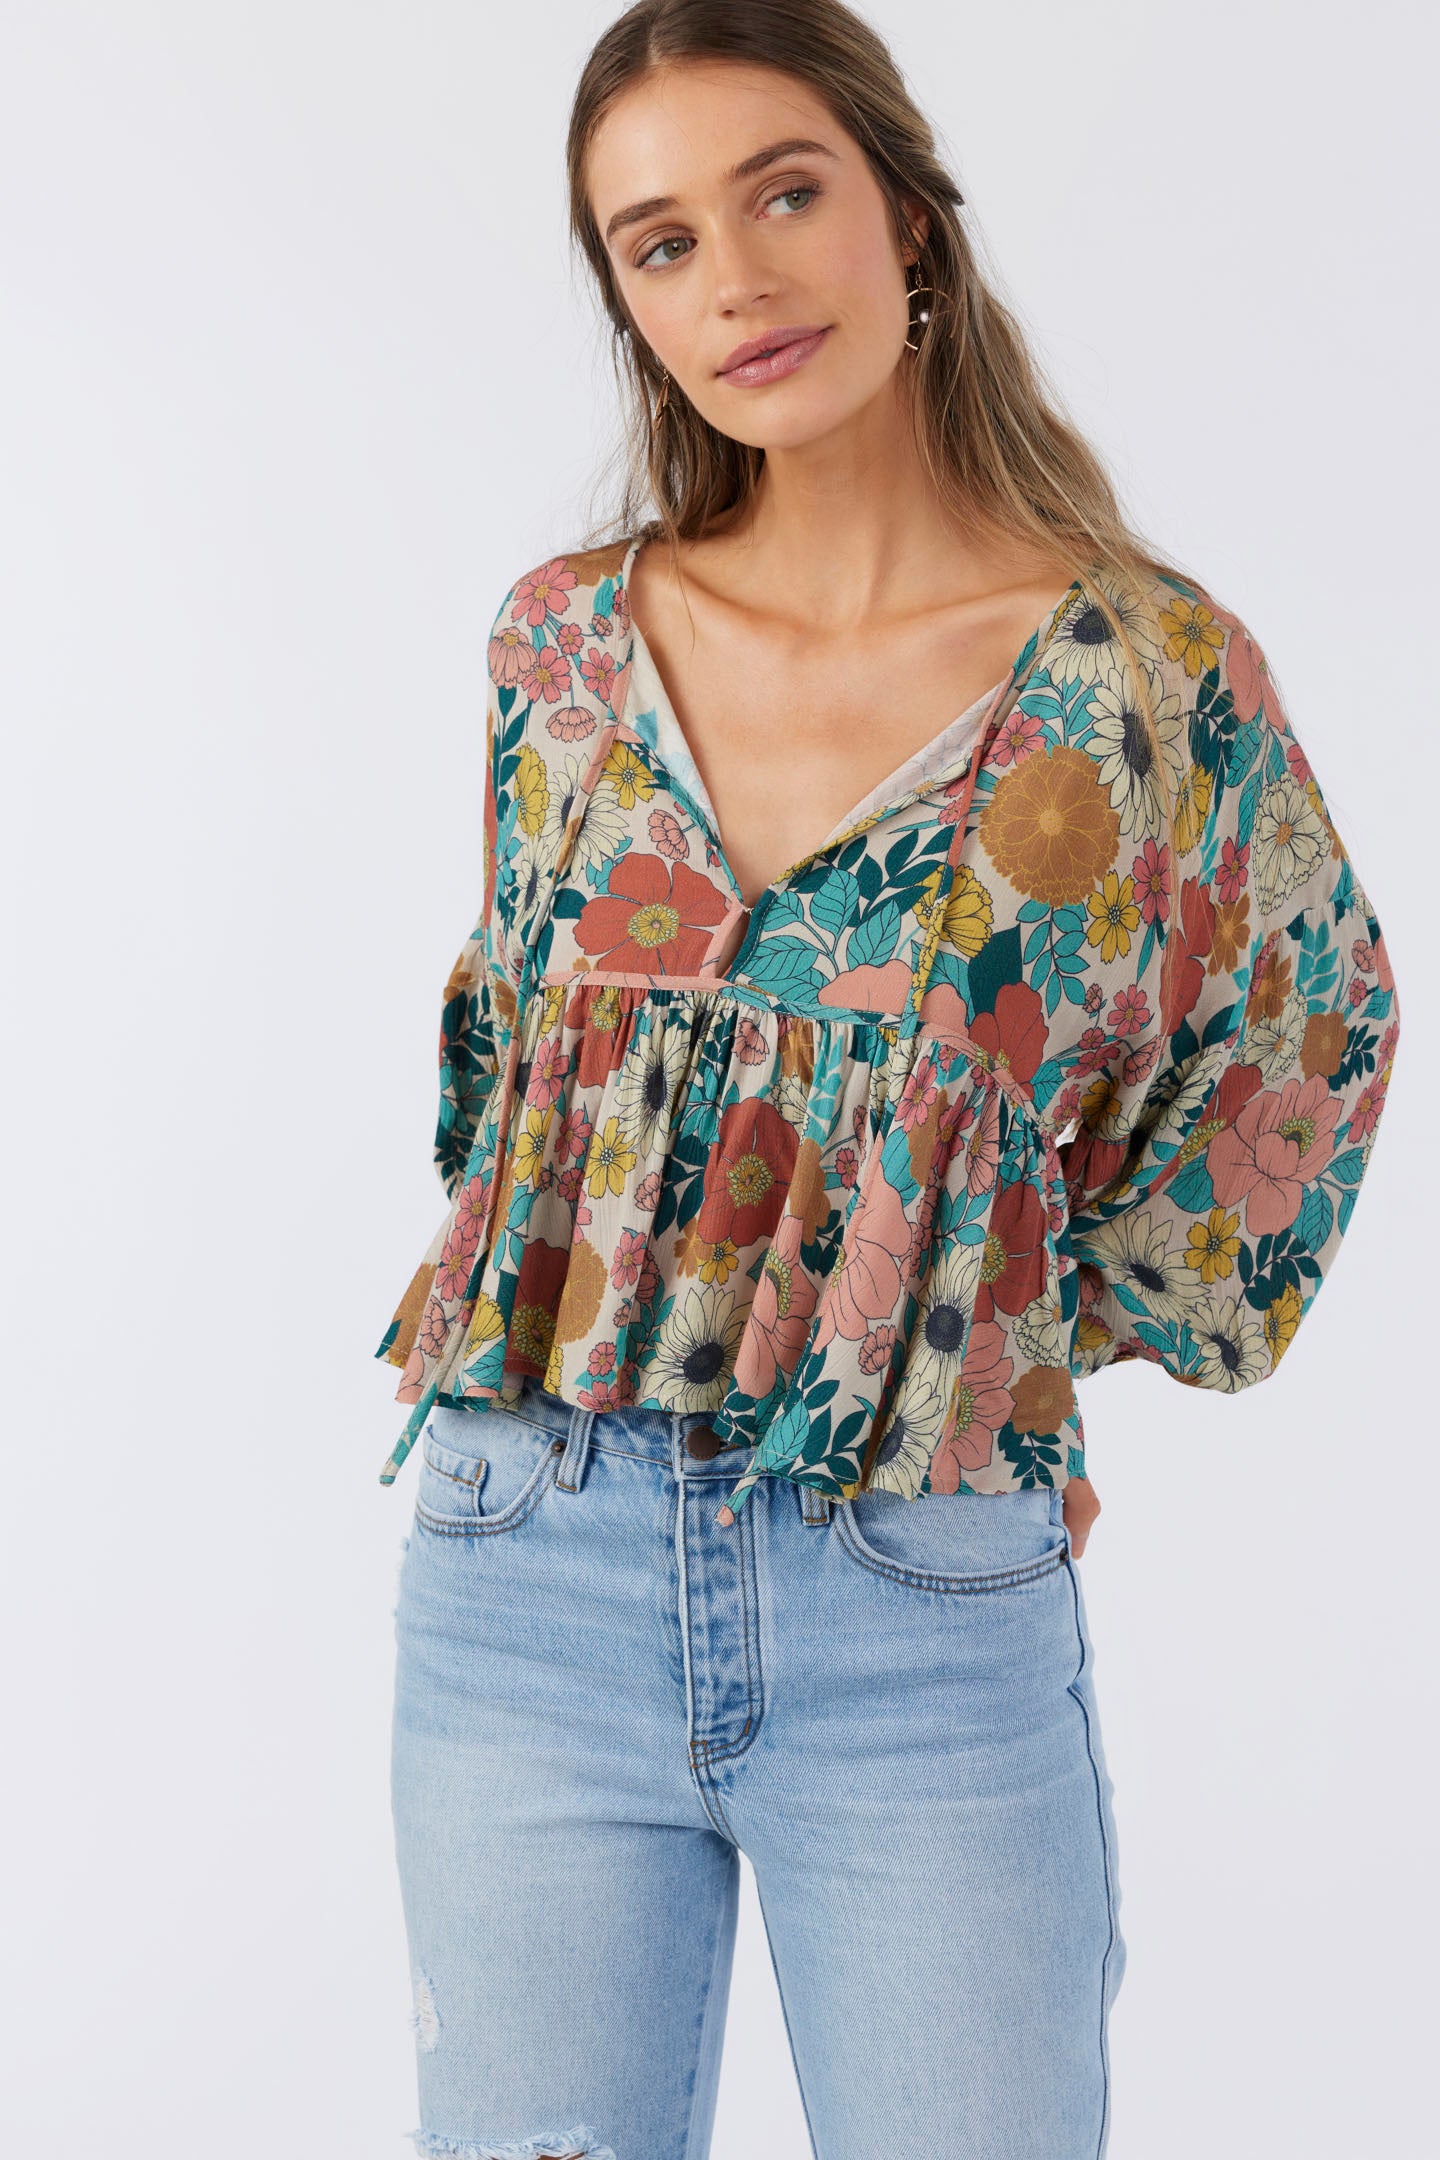 Junie Tenley Floral Top - Multi Colored | O'Neill